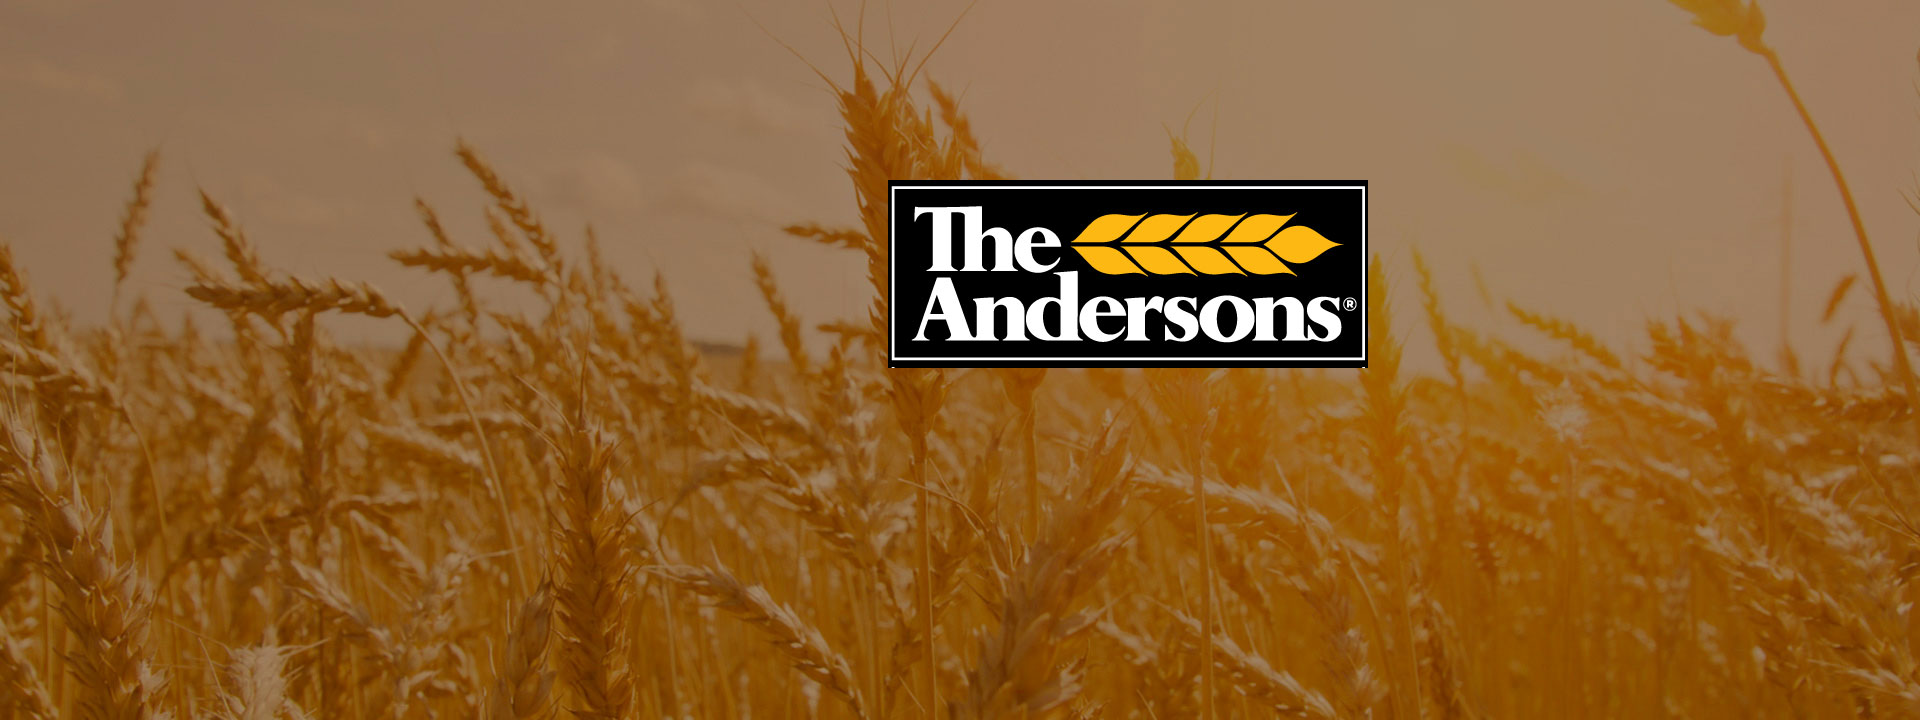 The Andersons Inc